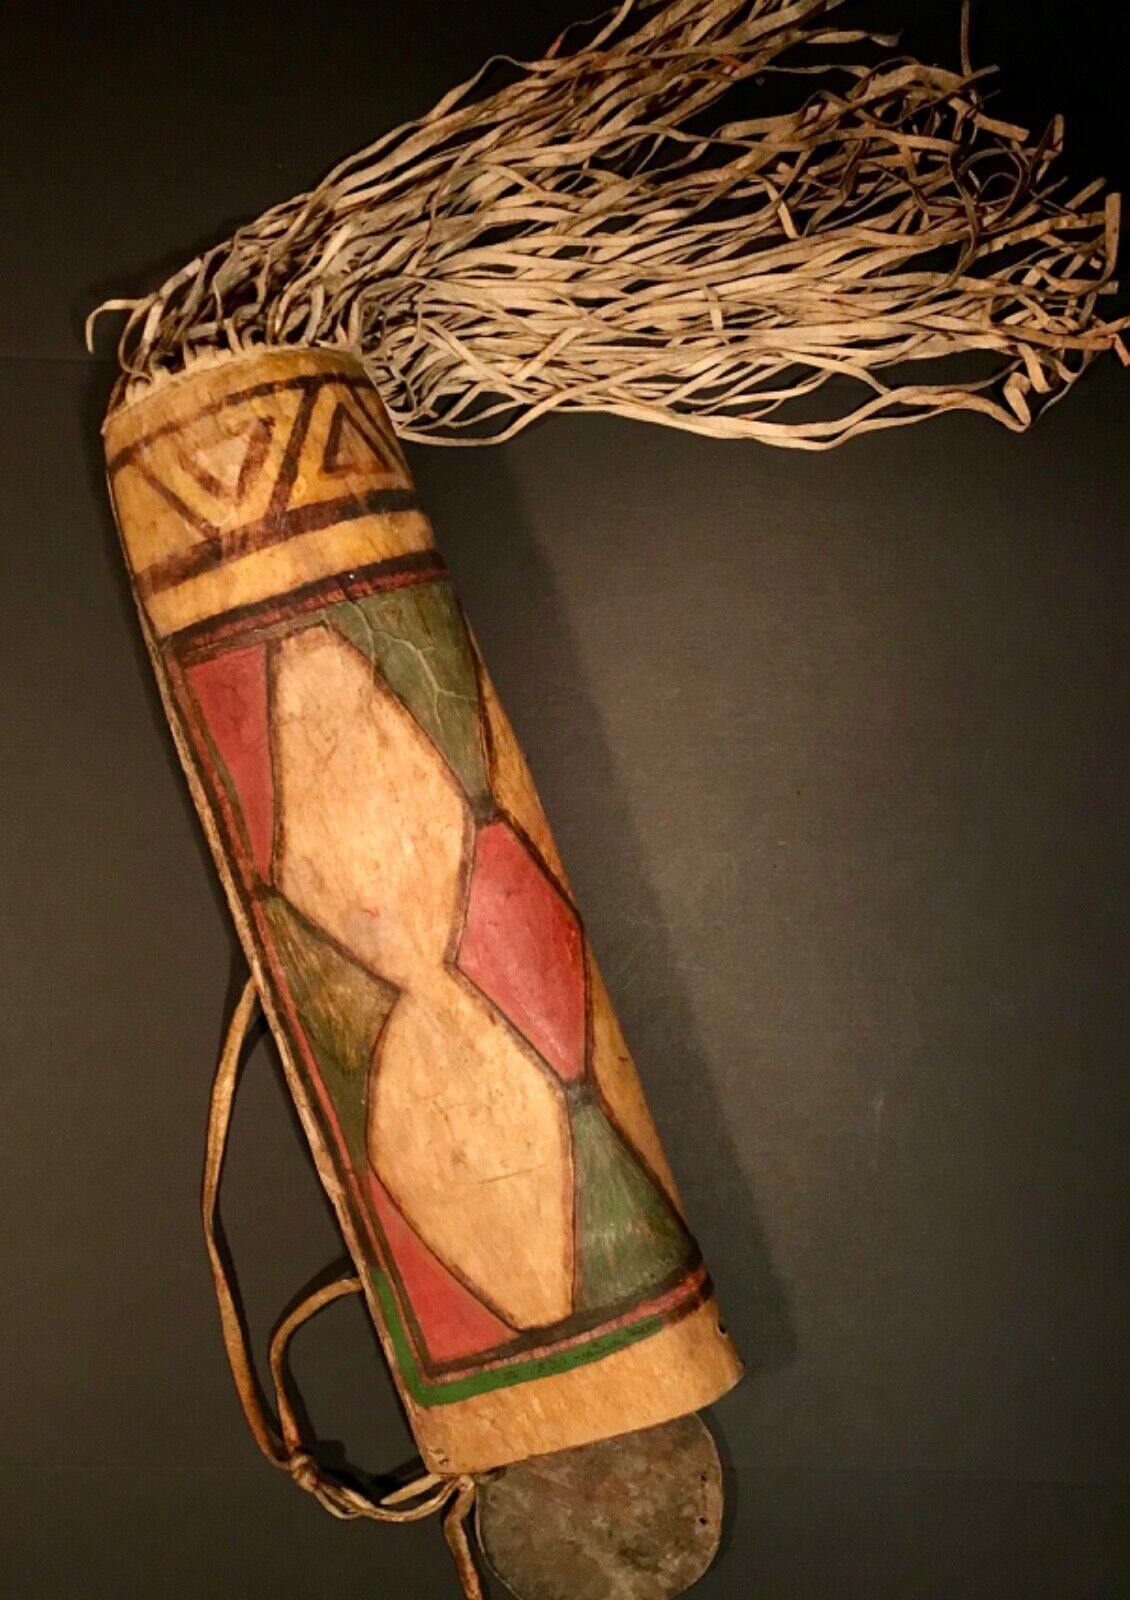 EXCEPTIONAL LATE 19TH C PLAINS PAINTED PARFLECHE FRINGED CYLINDRICAL CONTAINER